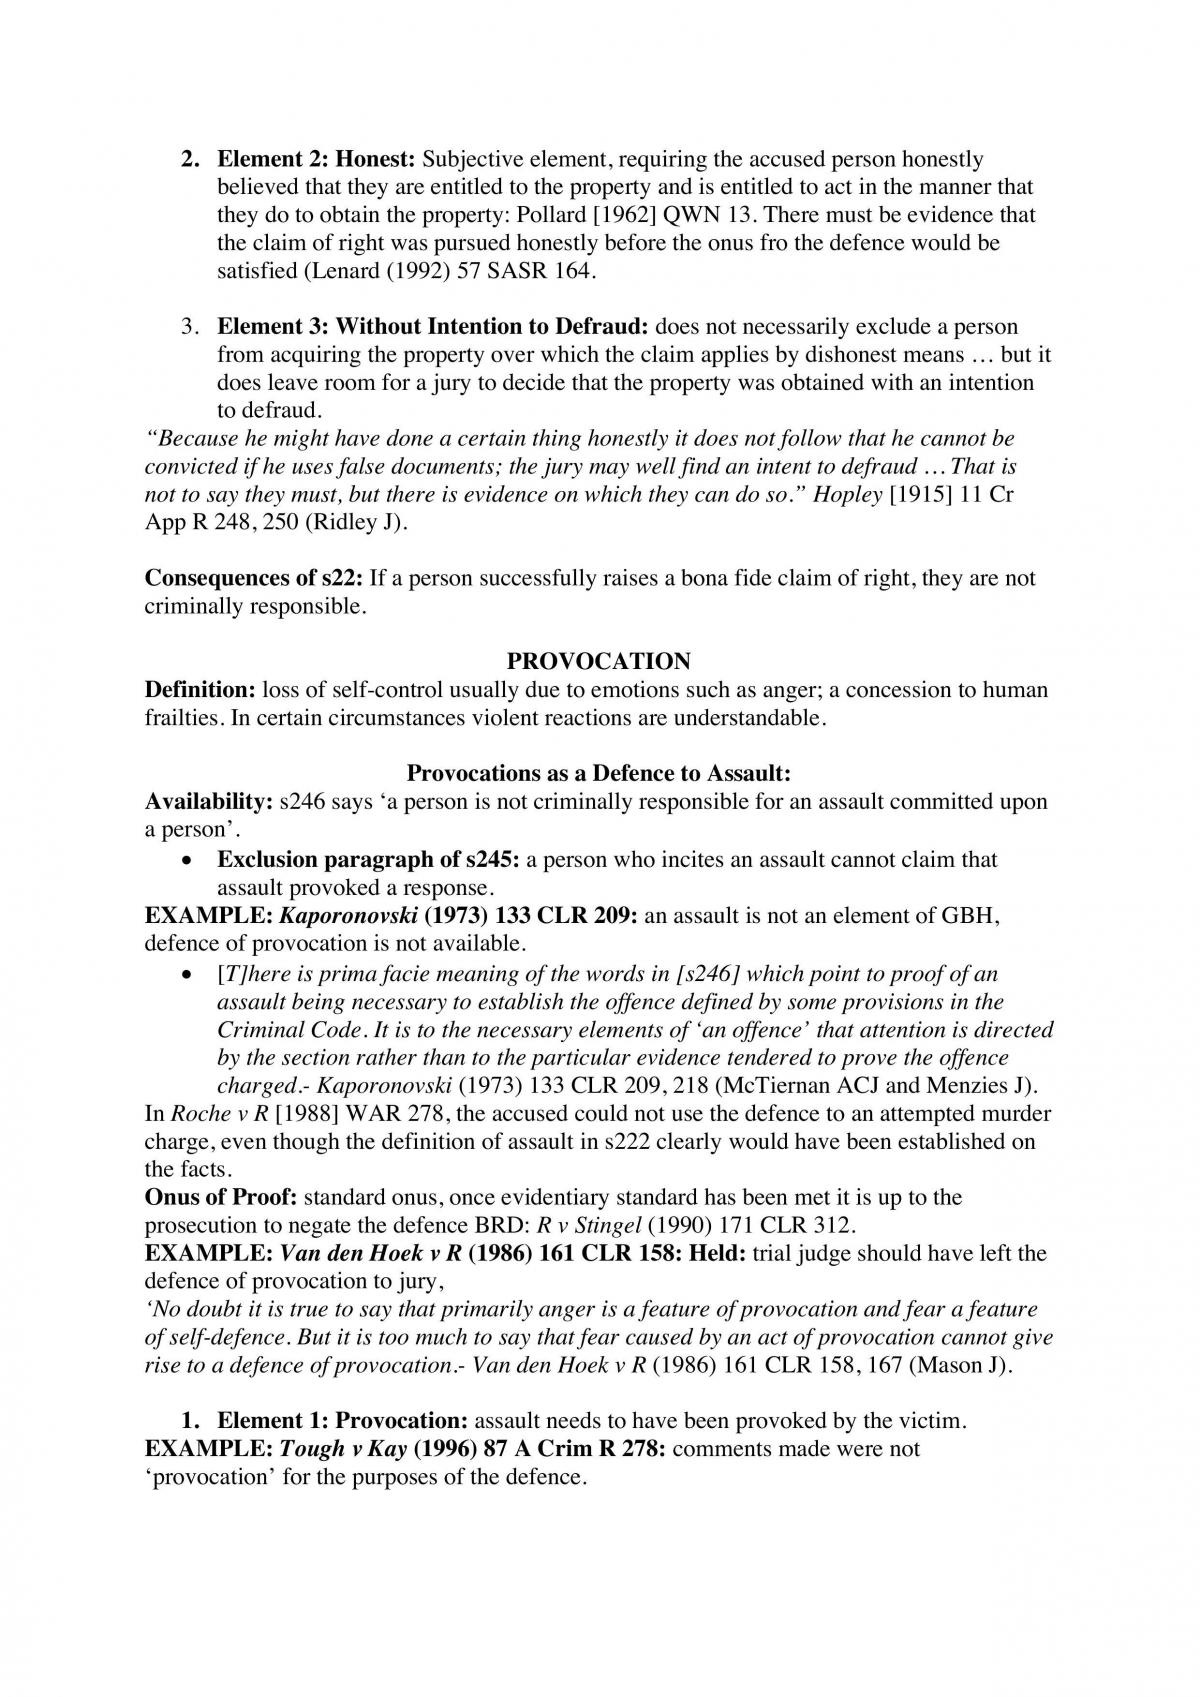 LW252 Exam Notes - Page 16